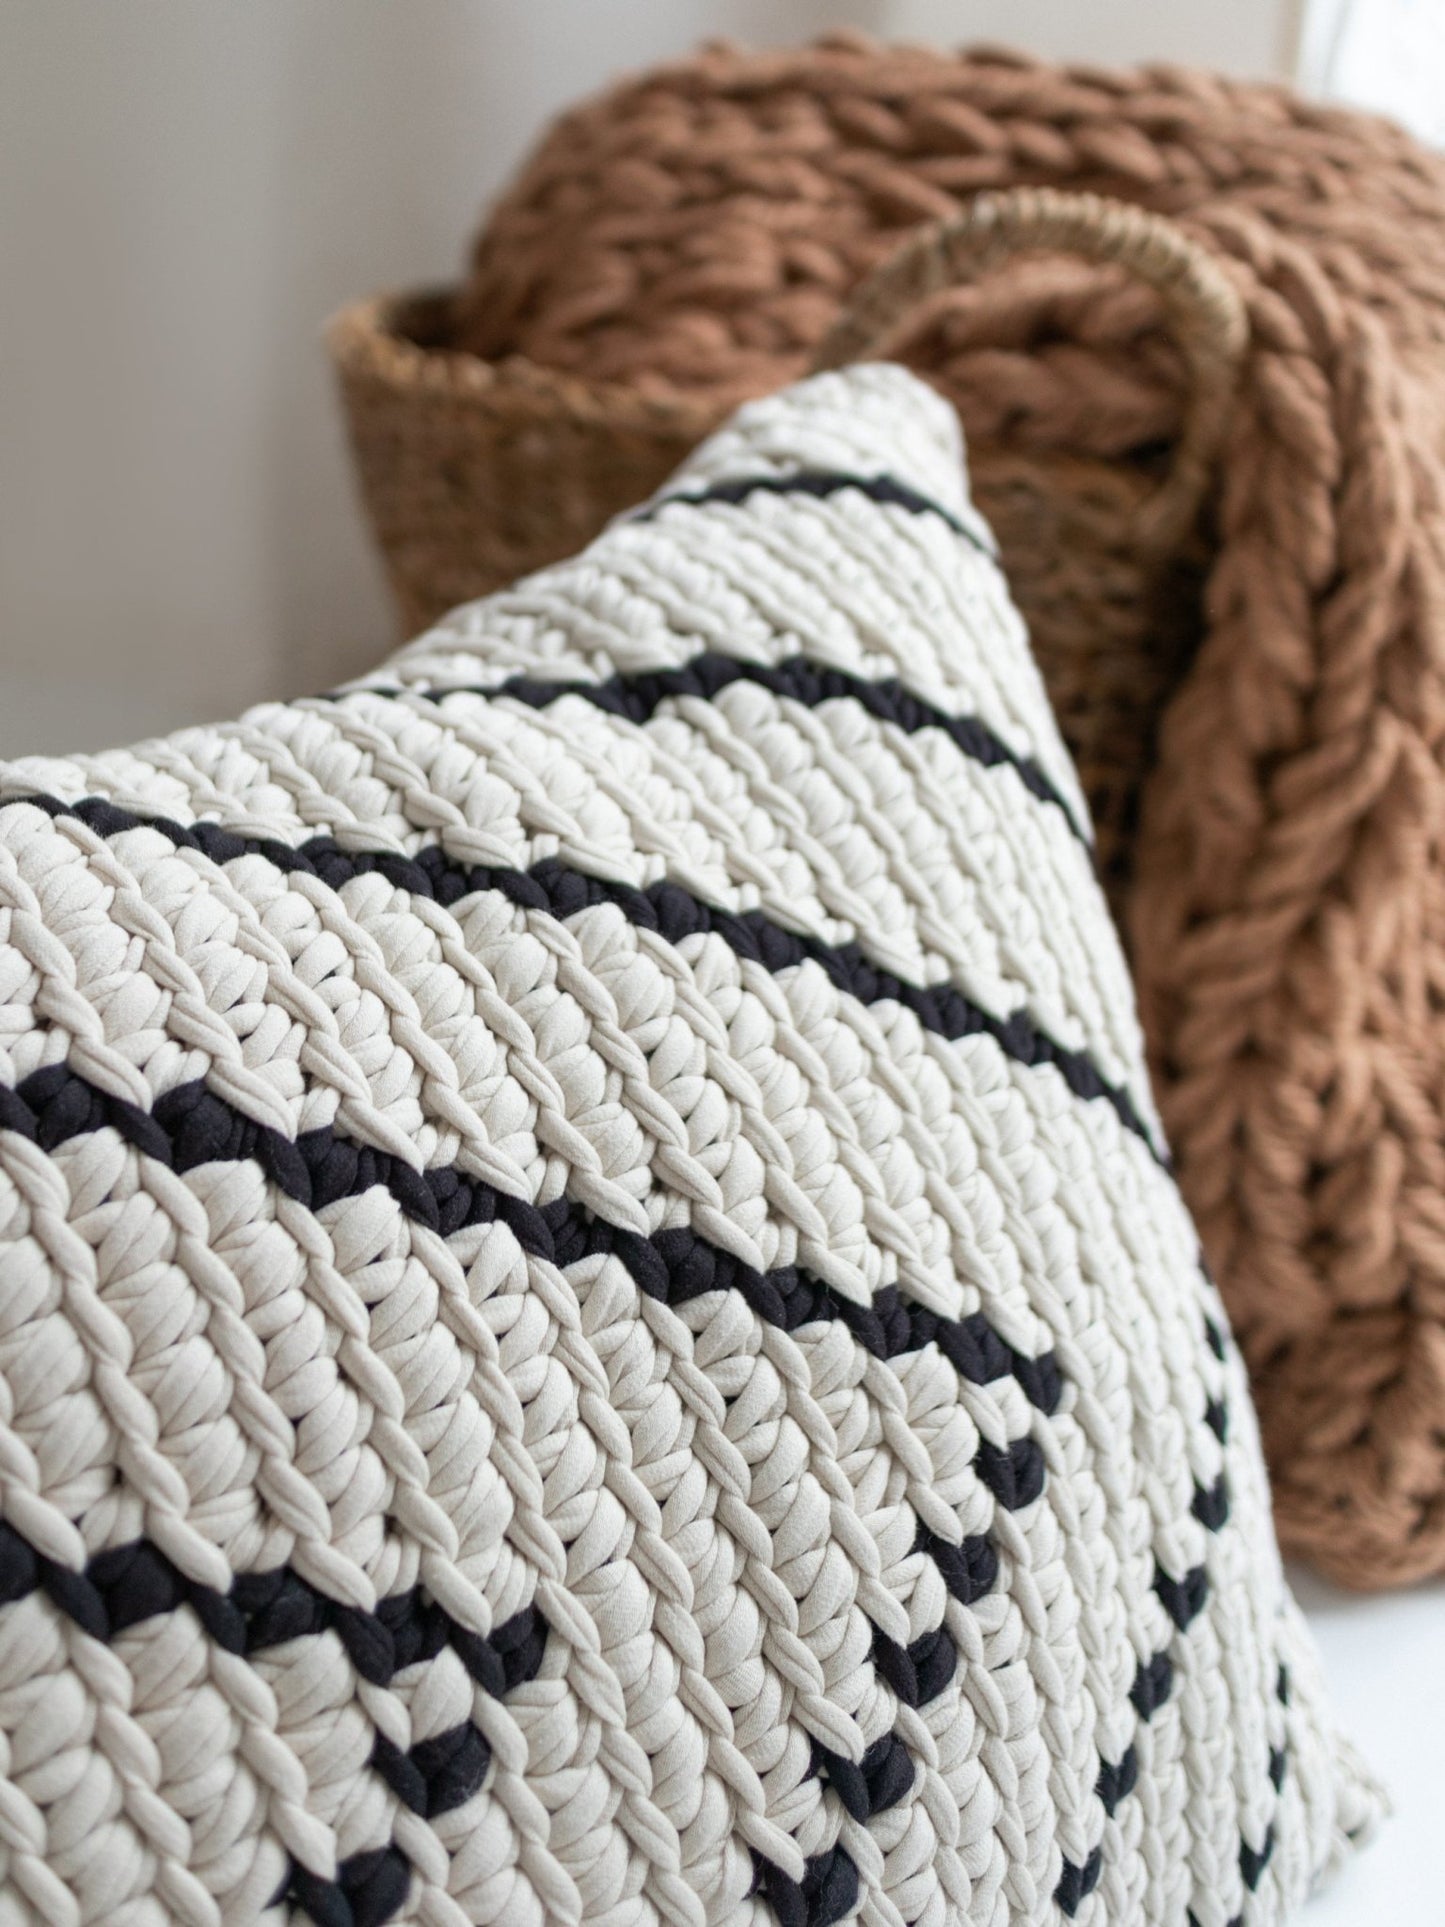 PATTERNED HANDKNIT PILLOW SNOW WHITE AND BLACK 20” - The Modern Heritage